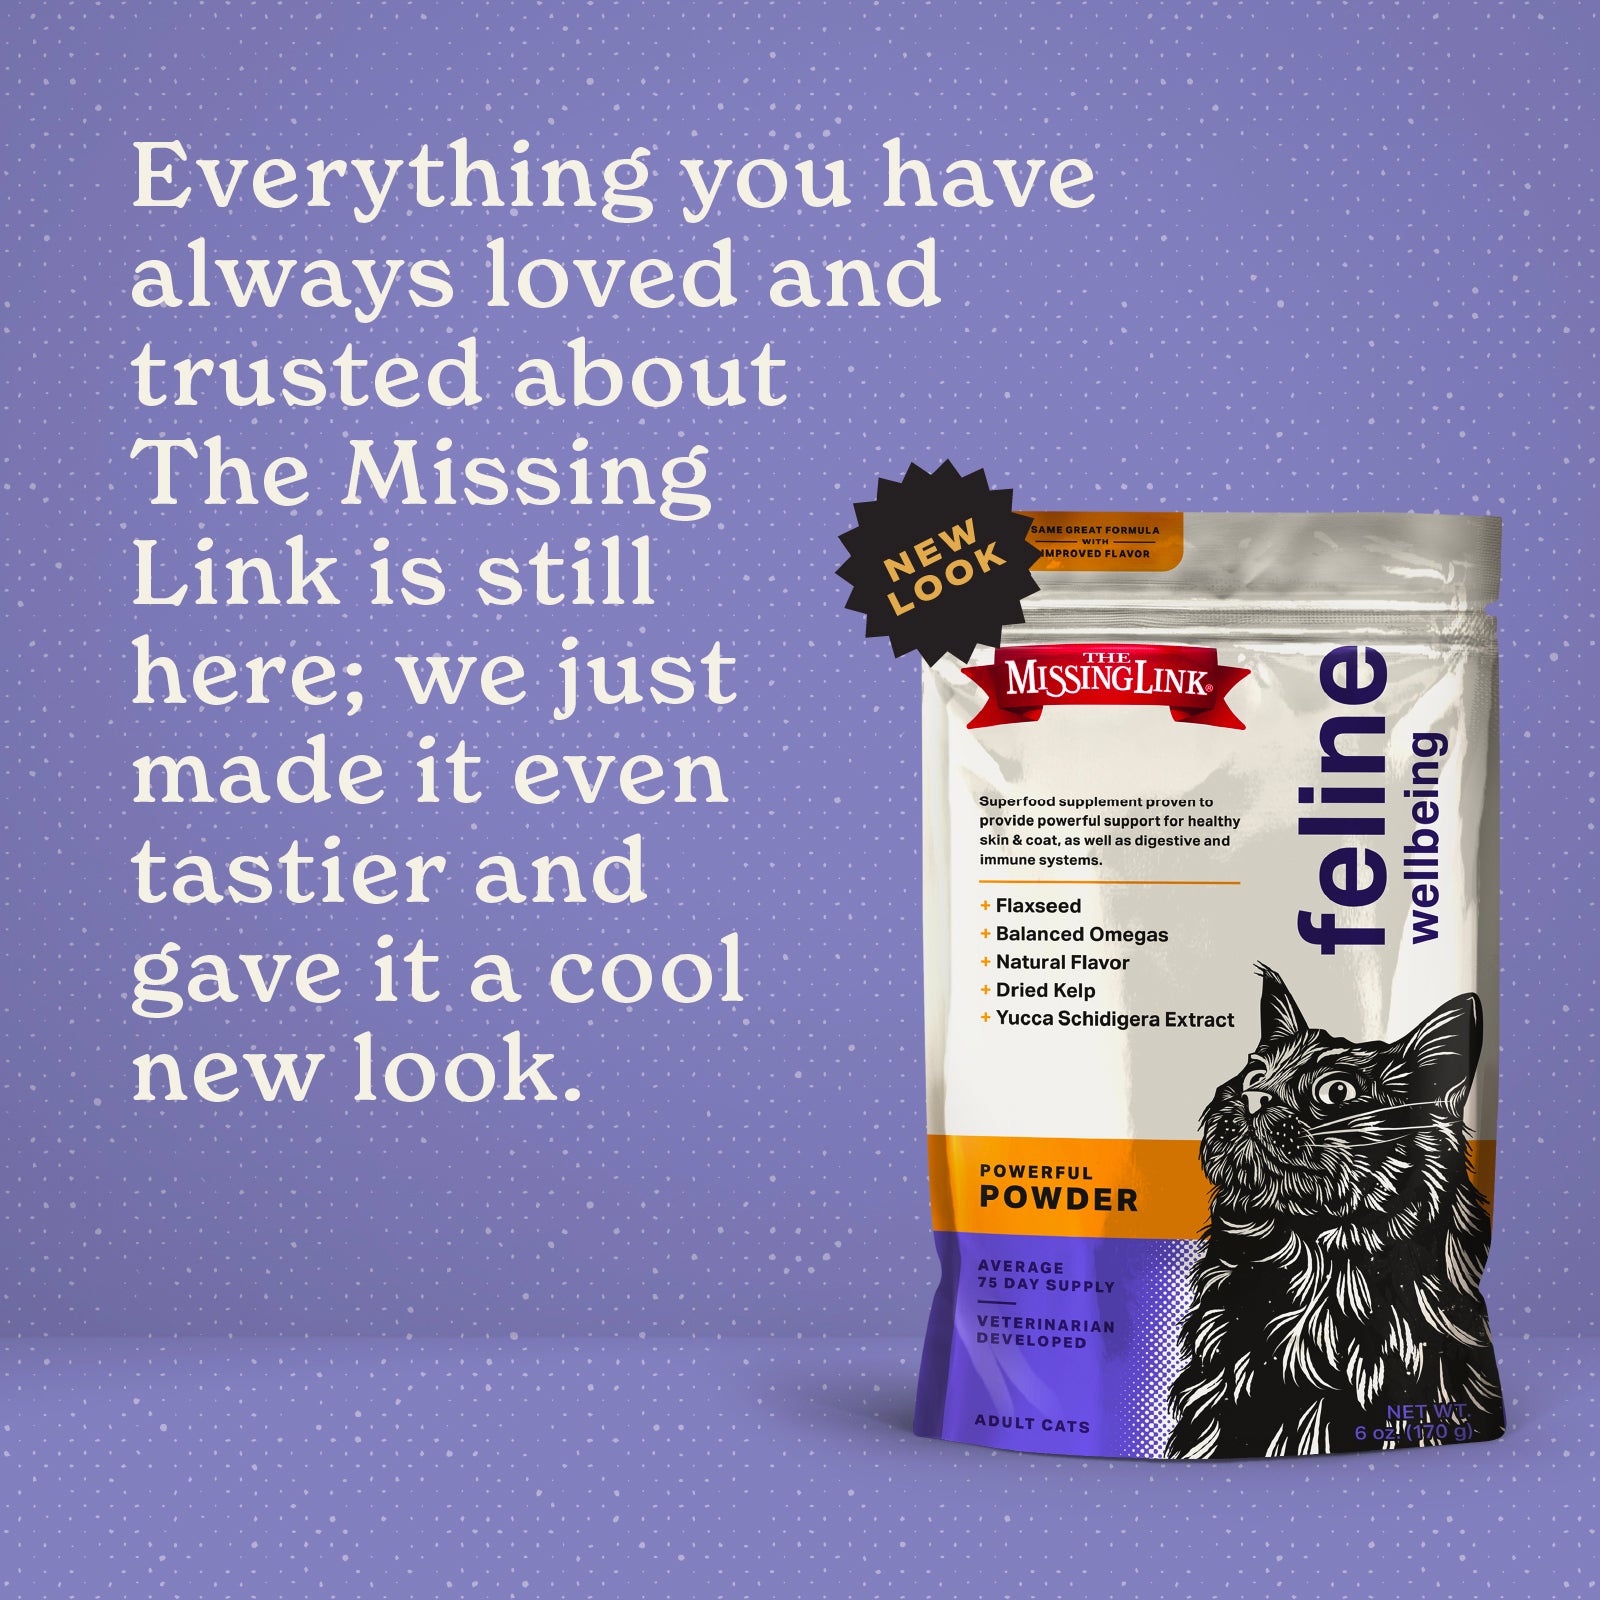 Everything you have always loved and trusted about The Missing Link is still here; we just made it even tastier and gave it a cool new look. 